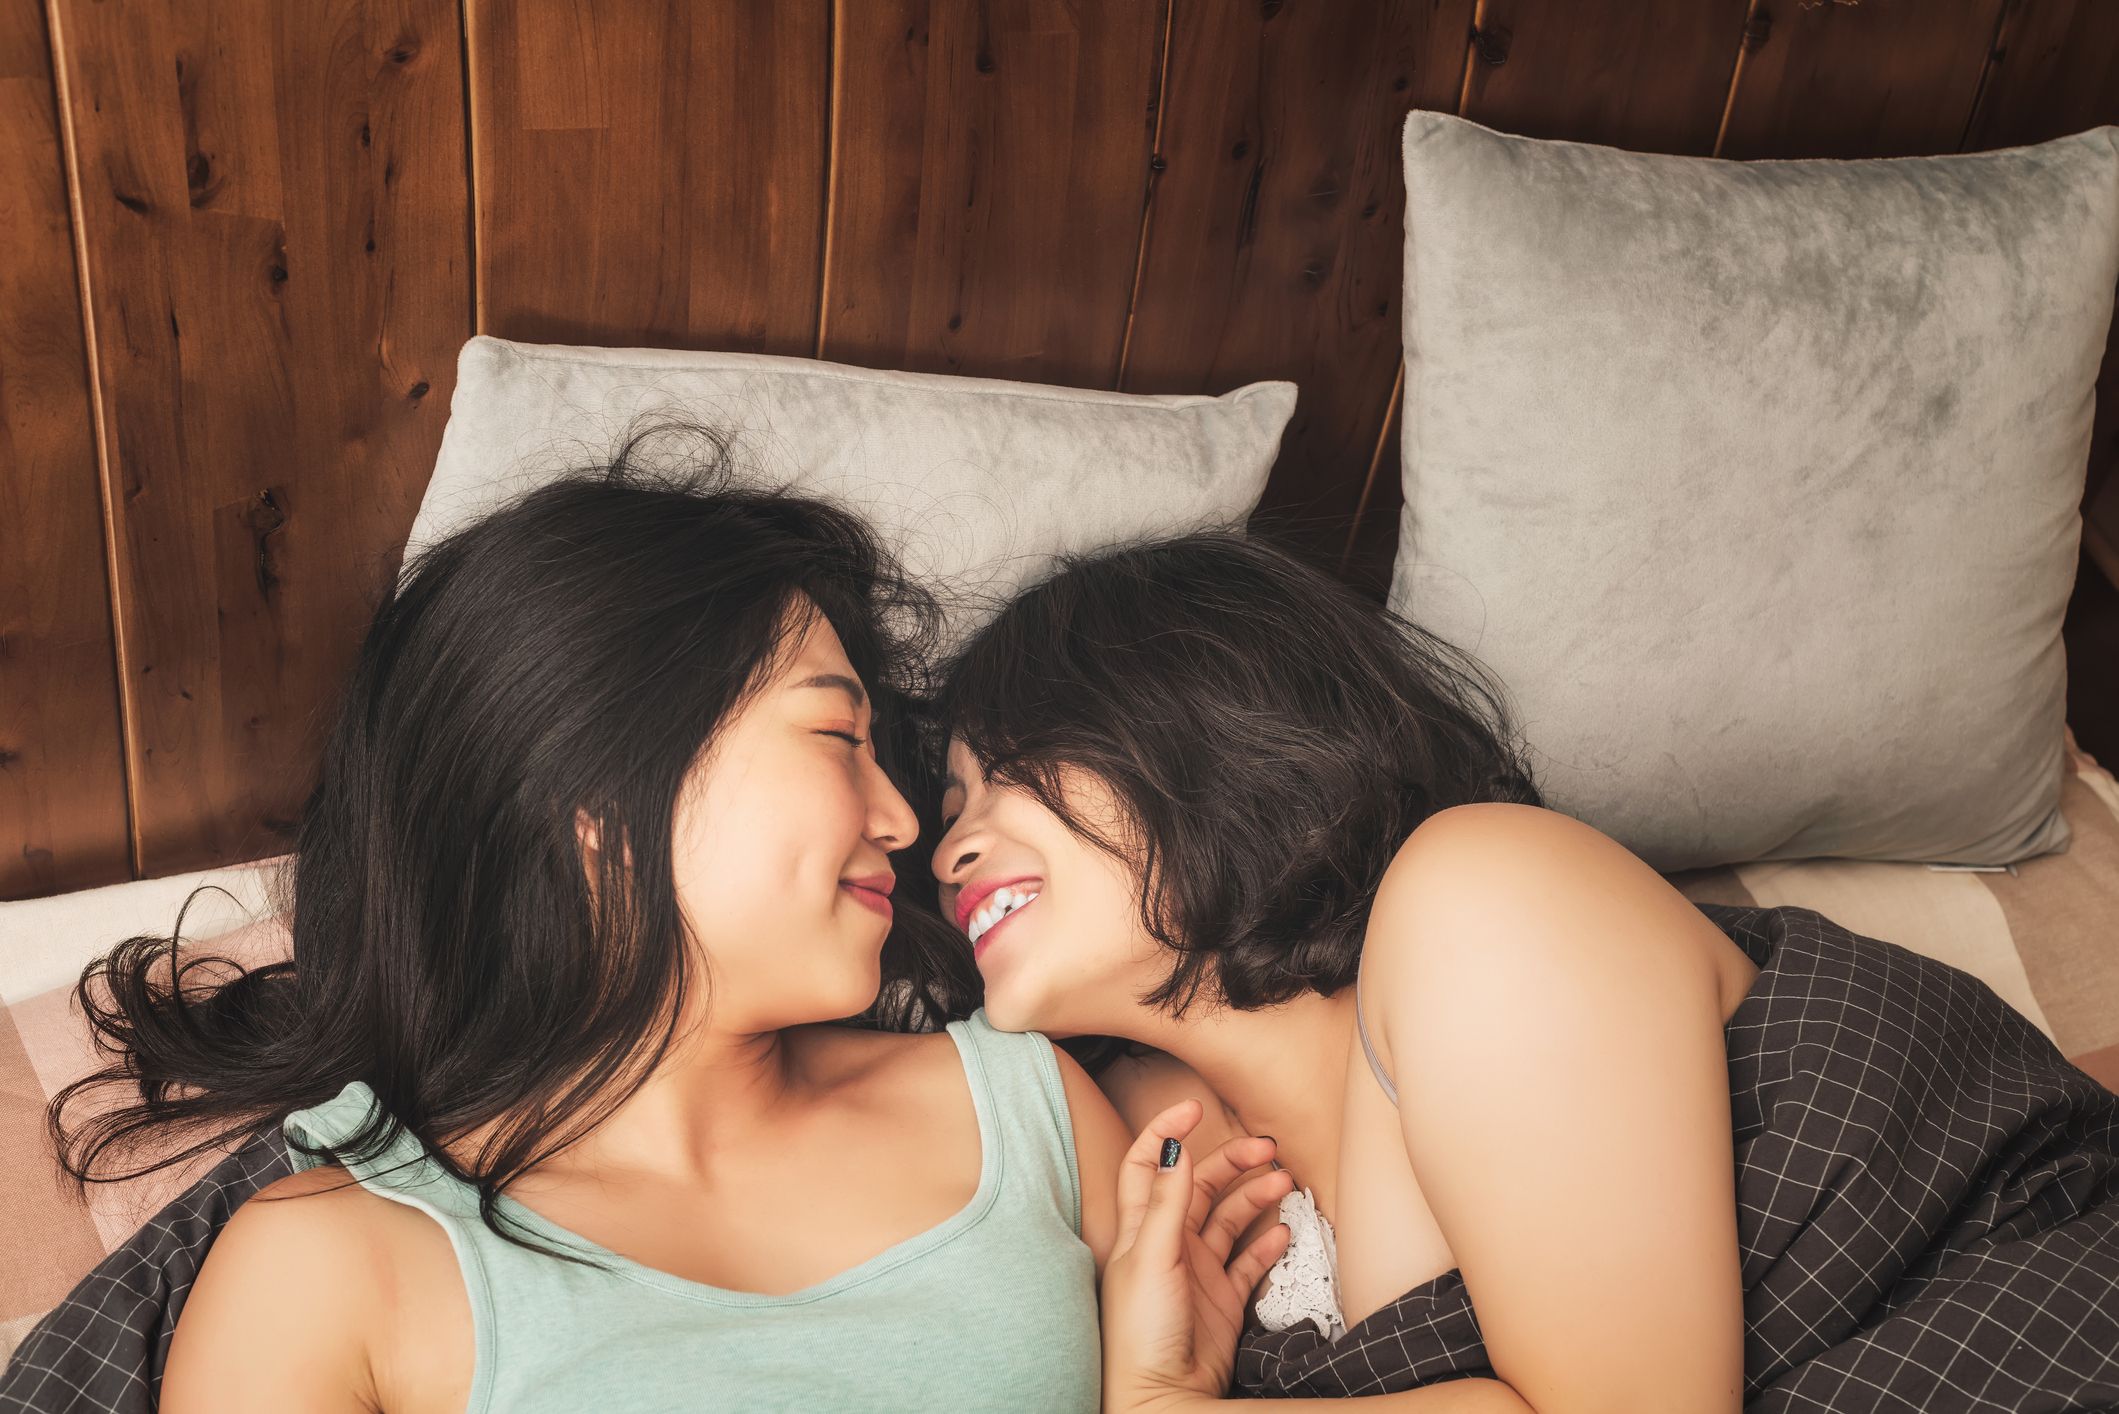 Why Straight Women May Prefer Lesbian Porn, Per Sex Therapists photo